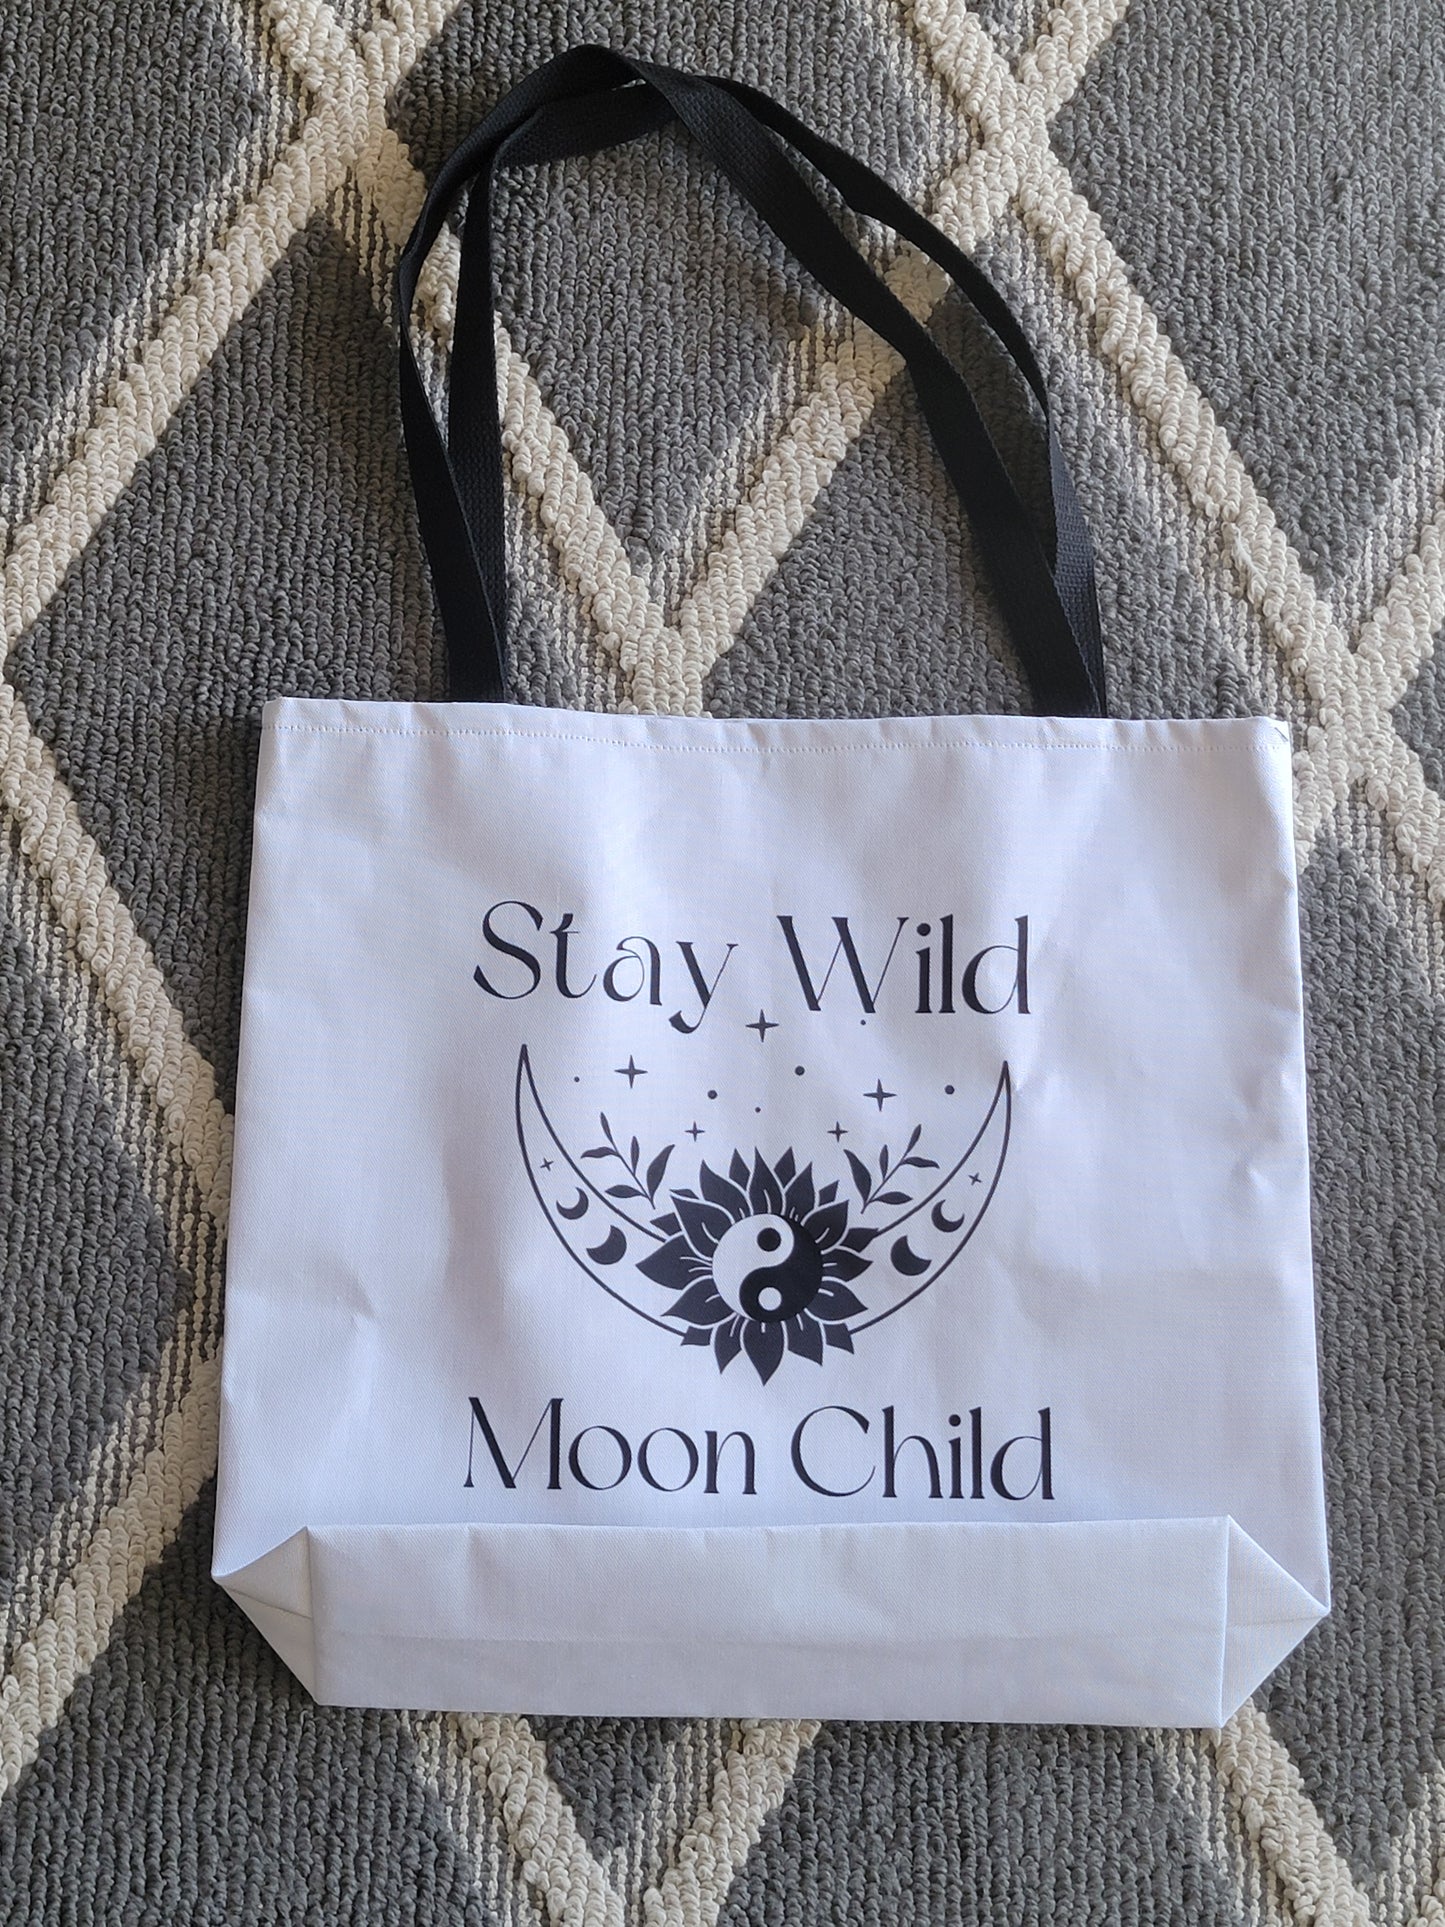 Stay wild moon child travel tote Bag, trendy tote bag, work tote bag, books tote bag